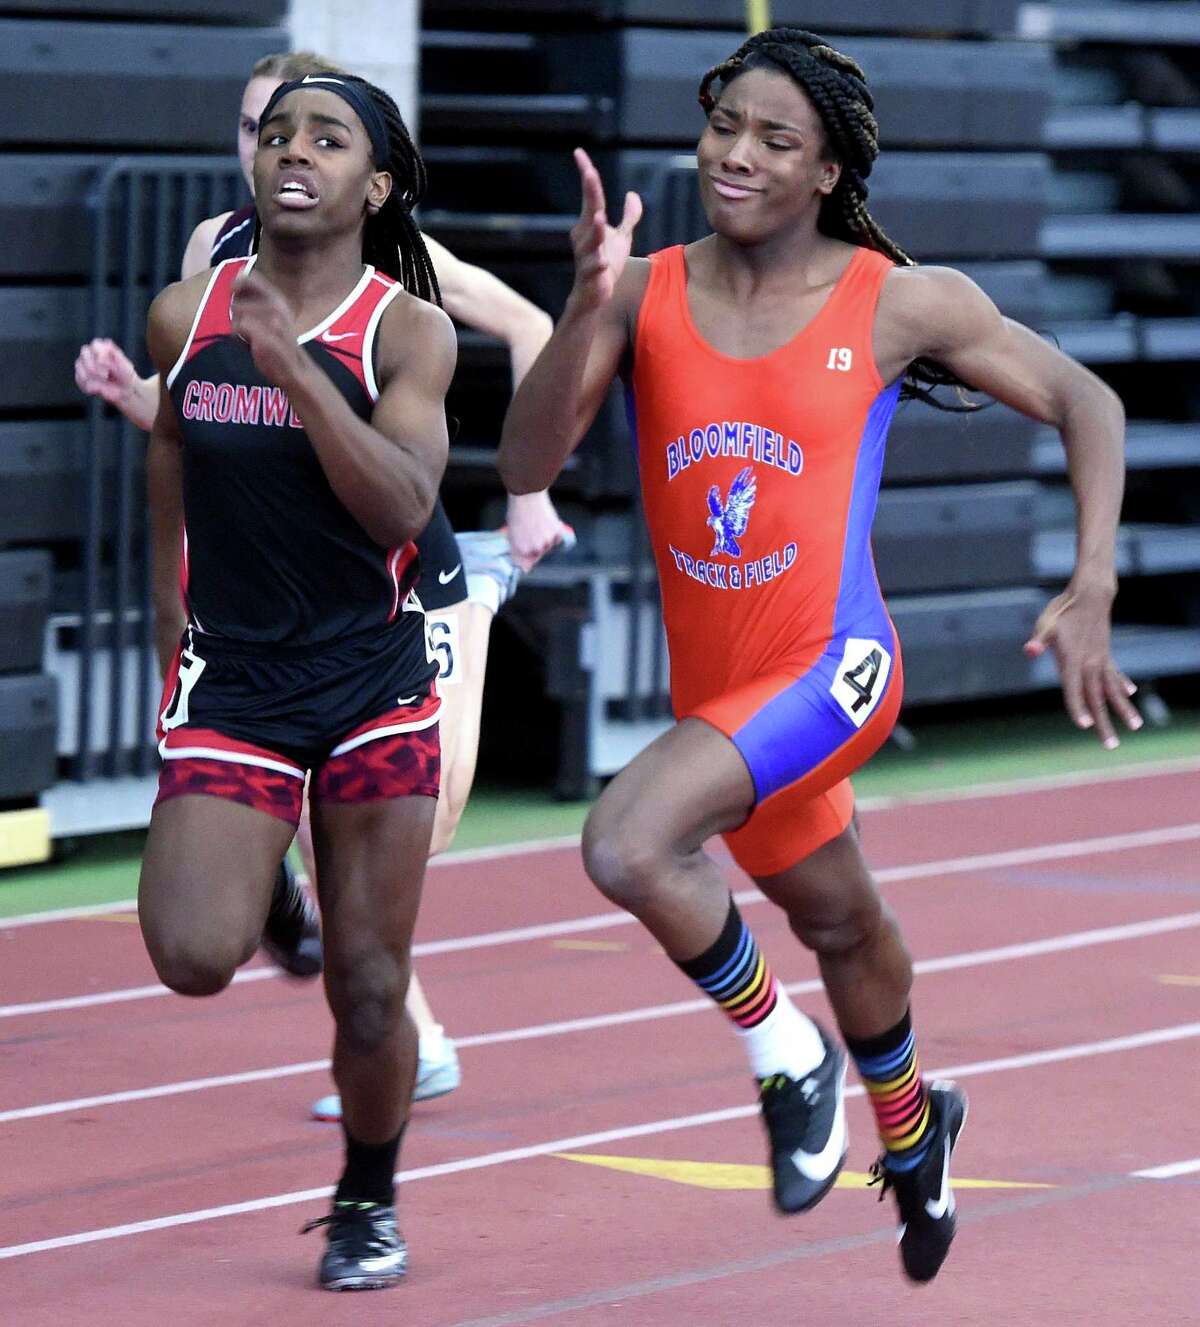 Bloomfield’s Terry Miller, right, runs to a first-place finish in the 55-meter dash at the State Open track championship at the Floyd Little Athletic Center in New Haven on Feb. 16.